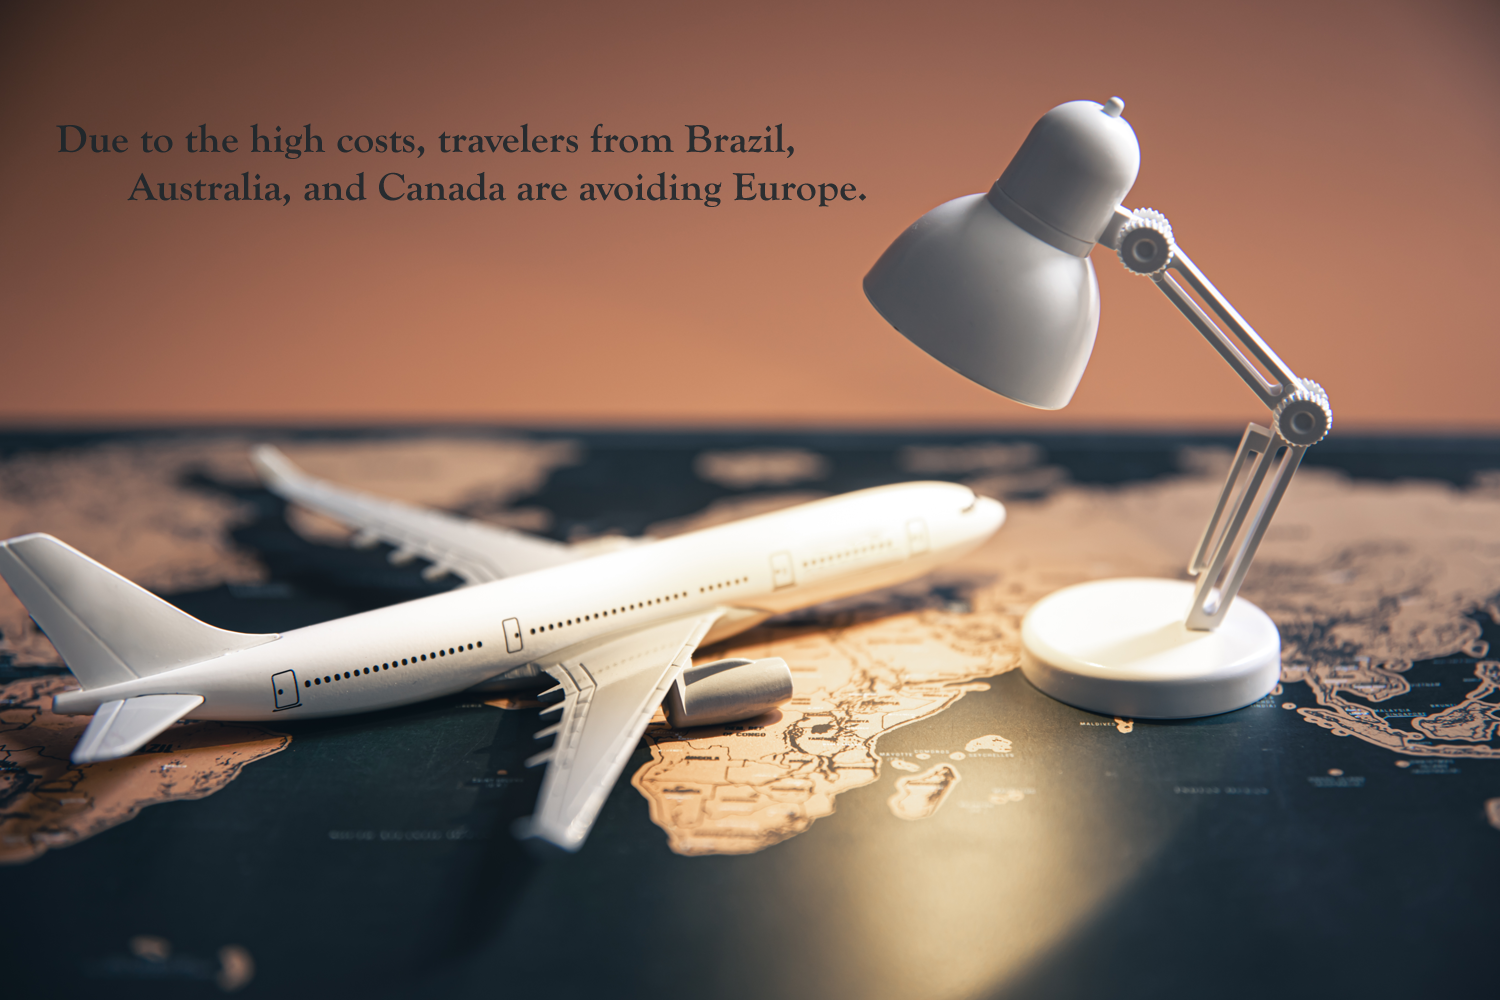 Due to the high costs, travelers from Brazil, Australia, and Canada are avoiding Europe.